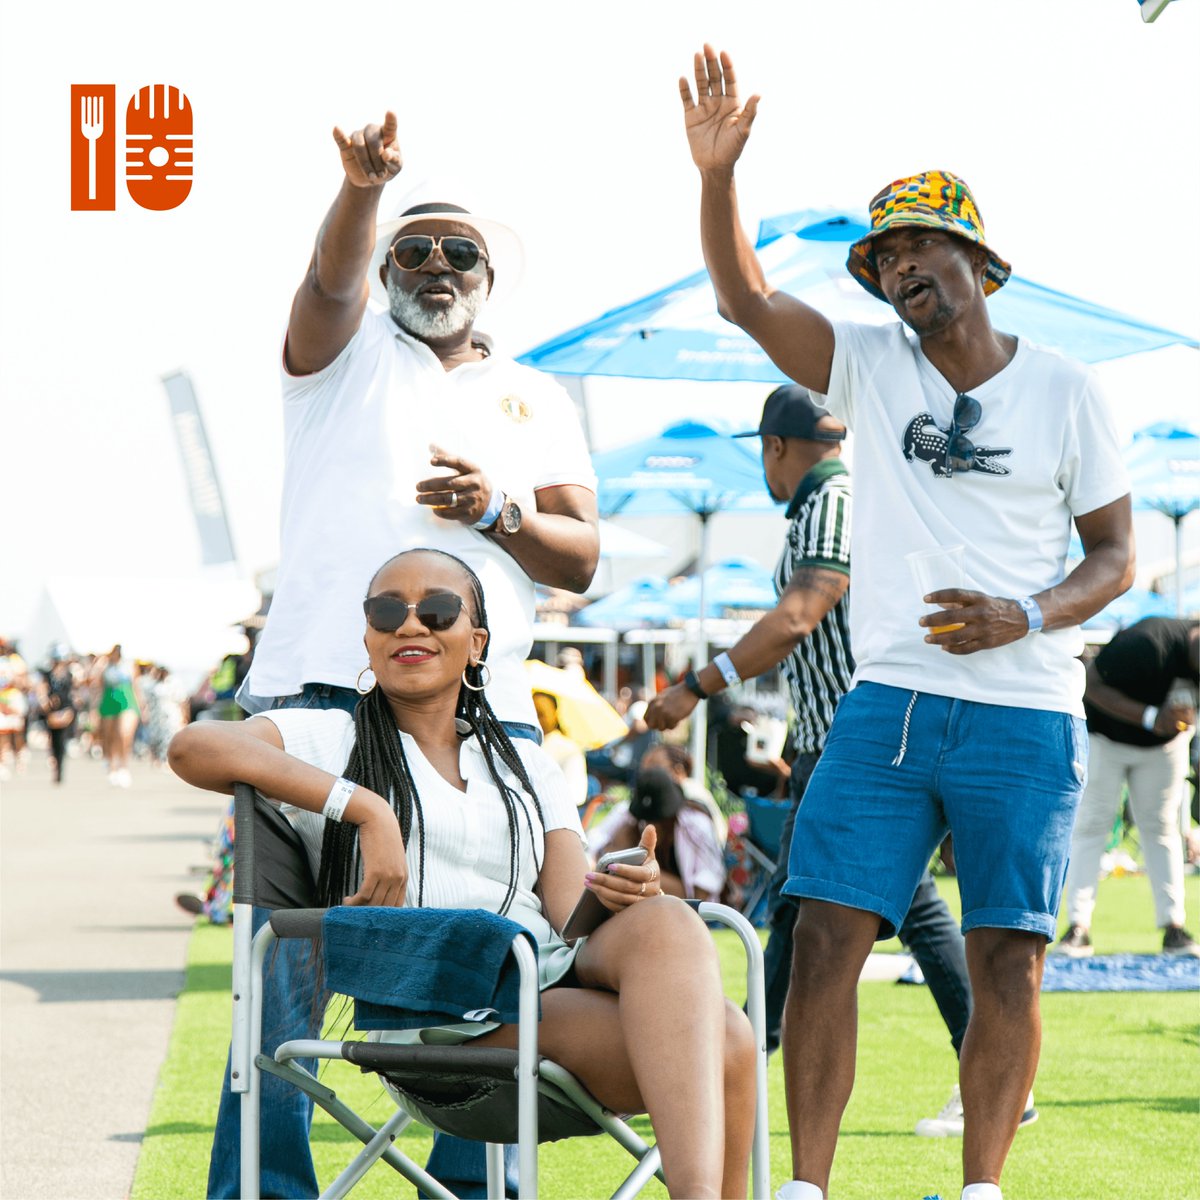 Still buzzing from the incredible weekend at #DStvDeliciousFestival! The music, food, and vibes were on point – a perfect blend of good times with even better company. #GPLifestyle #VisitGauteng #FoodAndMusicFestival #MusicFestival #MusicPeopleFood #Welcome2joburg